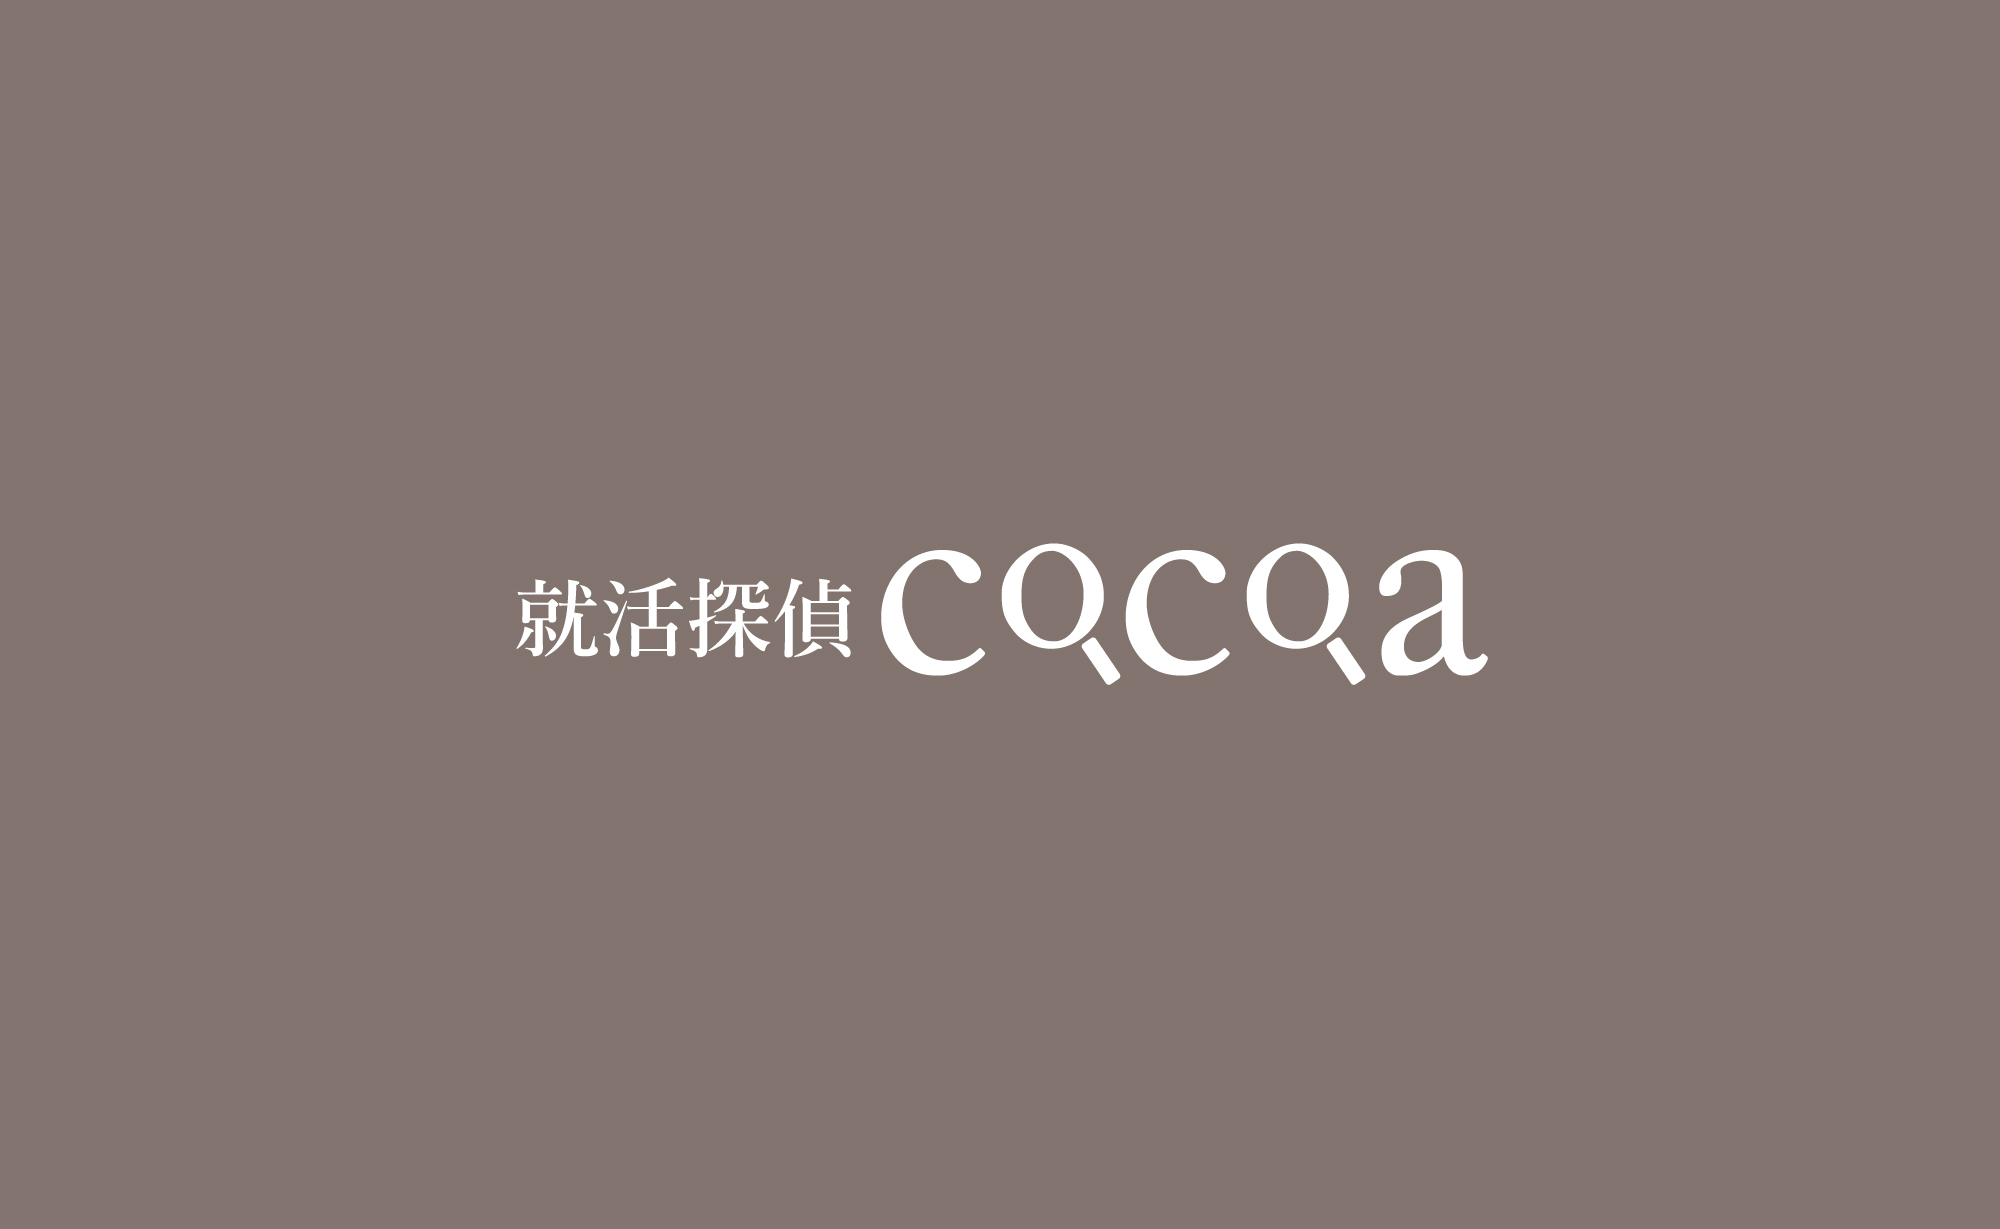 cocoatop